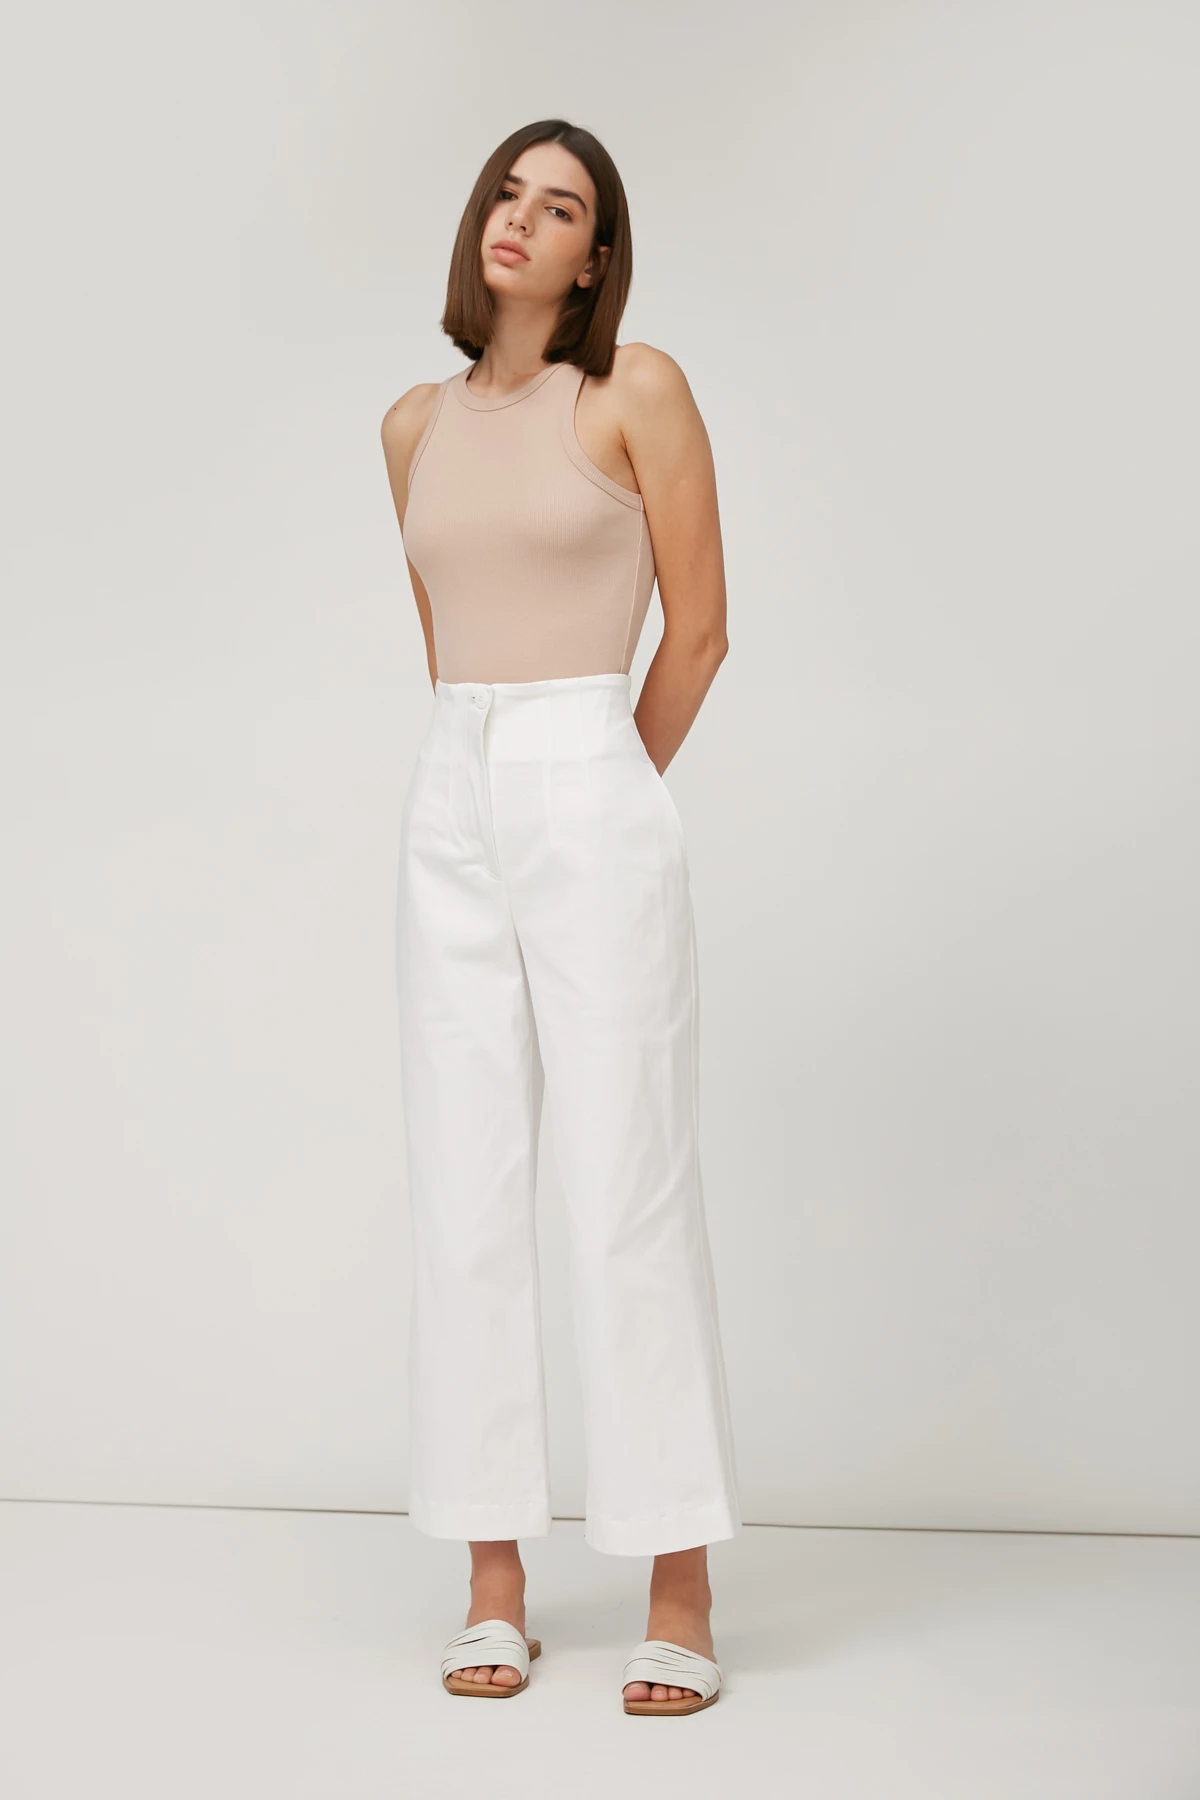 Shortened milky cotton trousers, photo 1